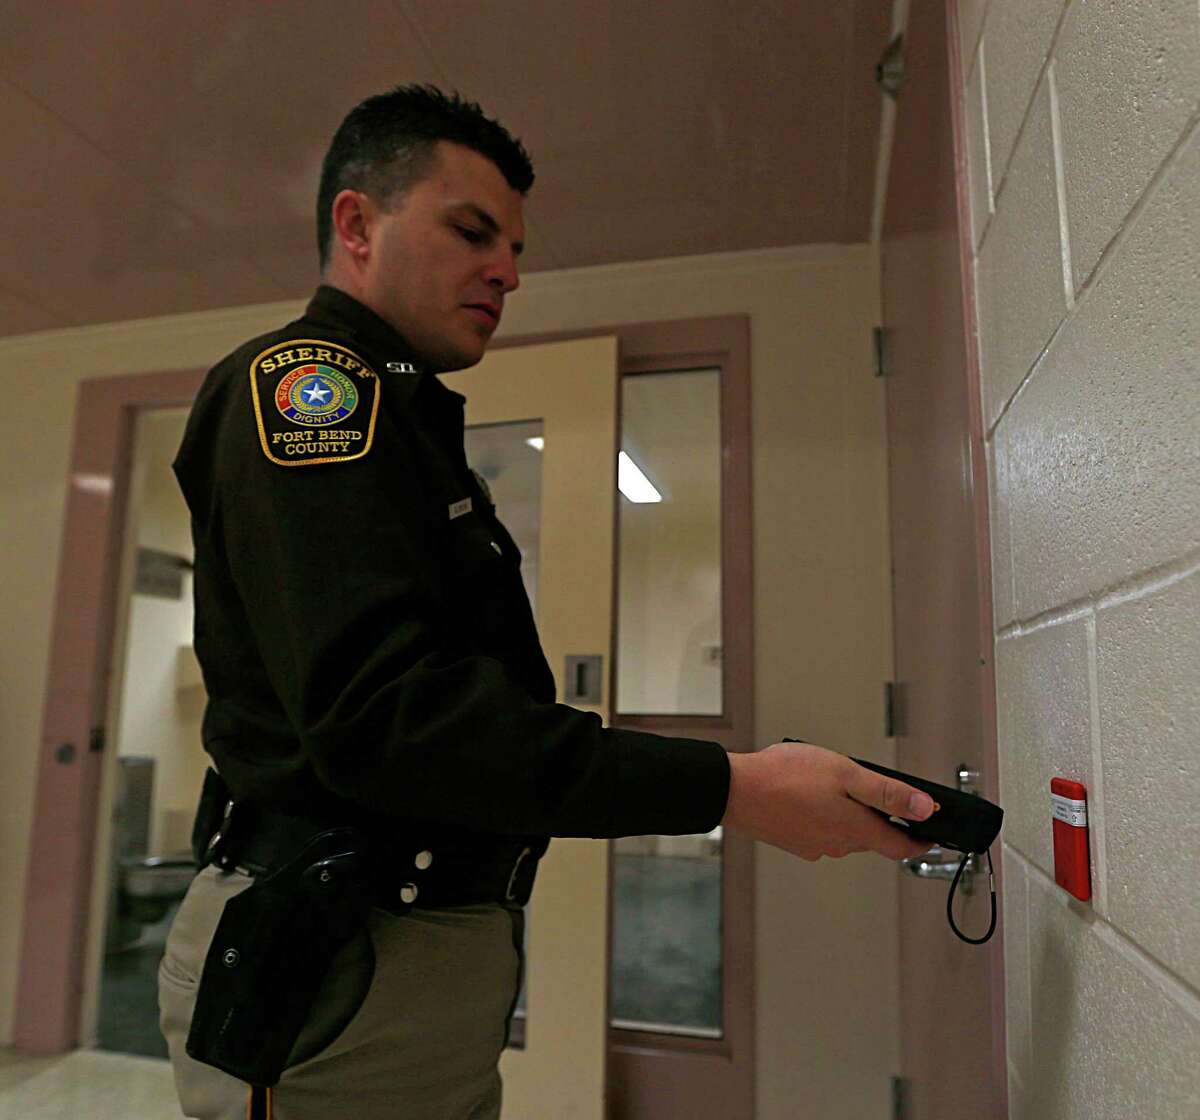 Fort Bend County Sheriff Deputy A. Smith scans an RFID location point during a demonstration of the GUARDIAN RFID inmate management system Thursday, Jan. 21, 2016, in Richmond. Fort Bend County jail is implementing a new electronic system for guards making their rounds.